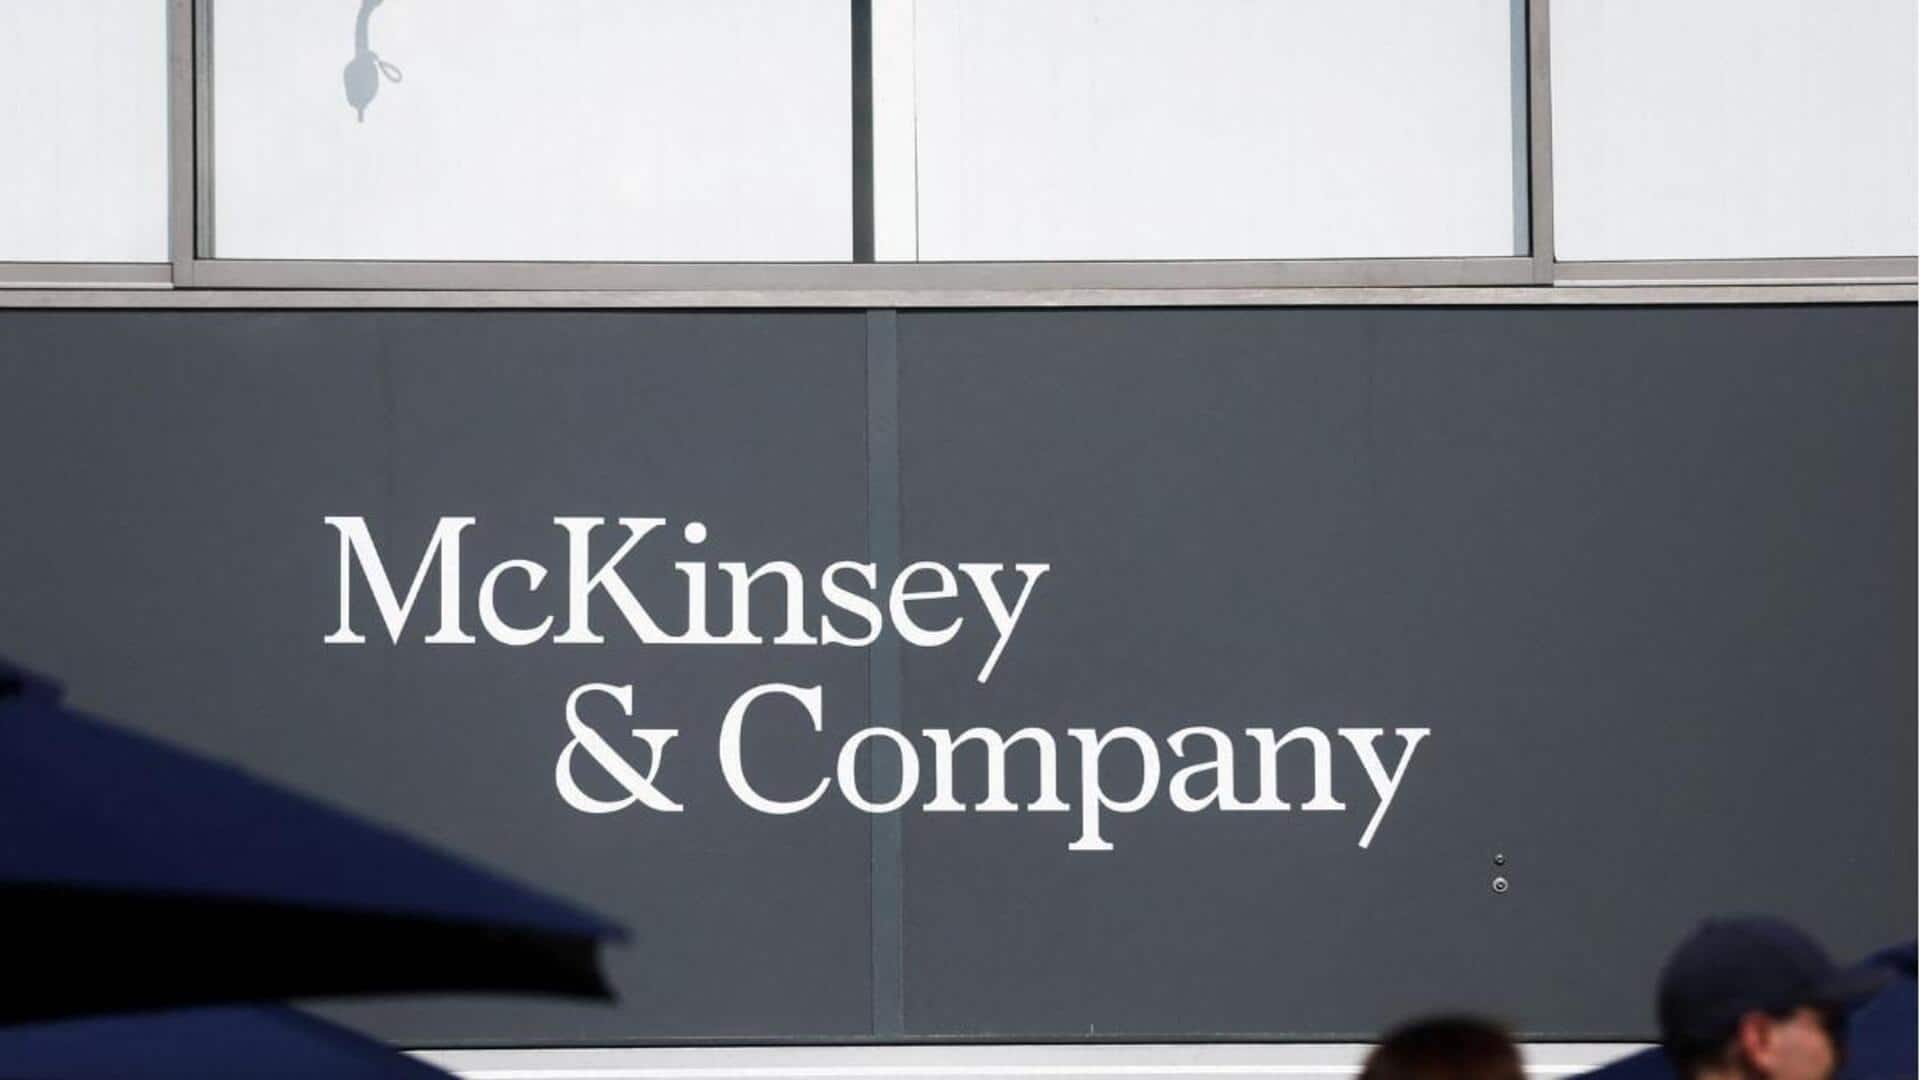 Consulting giant McKinsey settles opioid lawsuits for $230 million